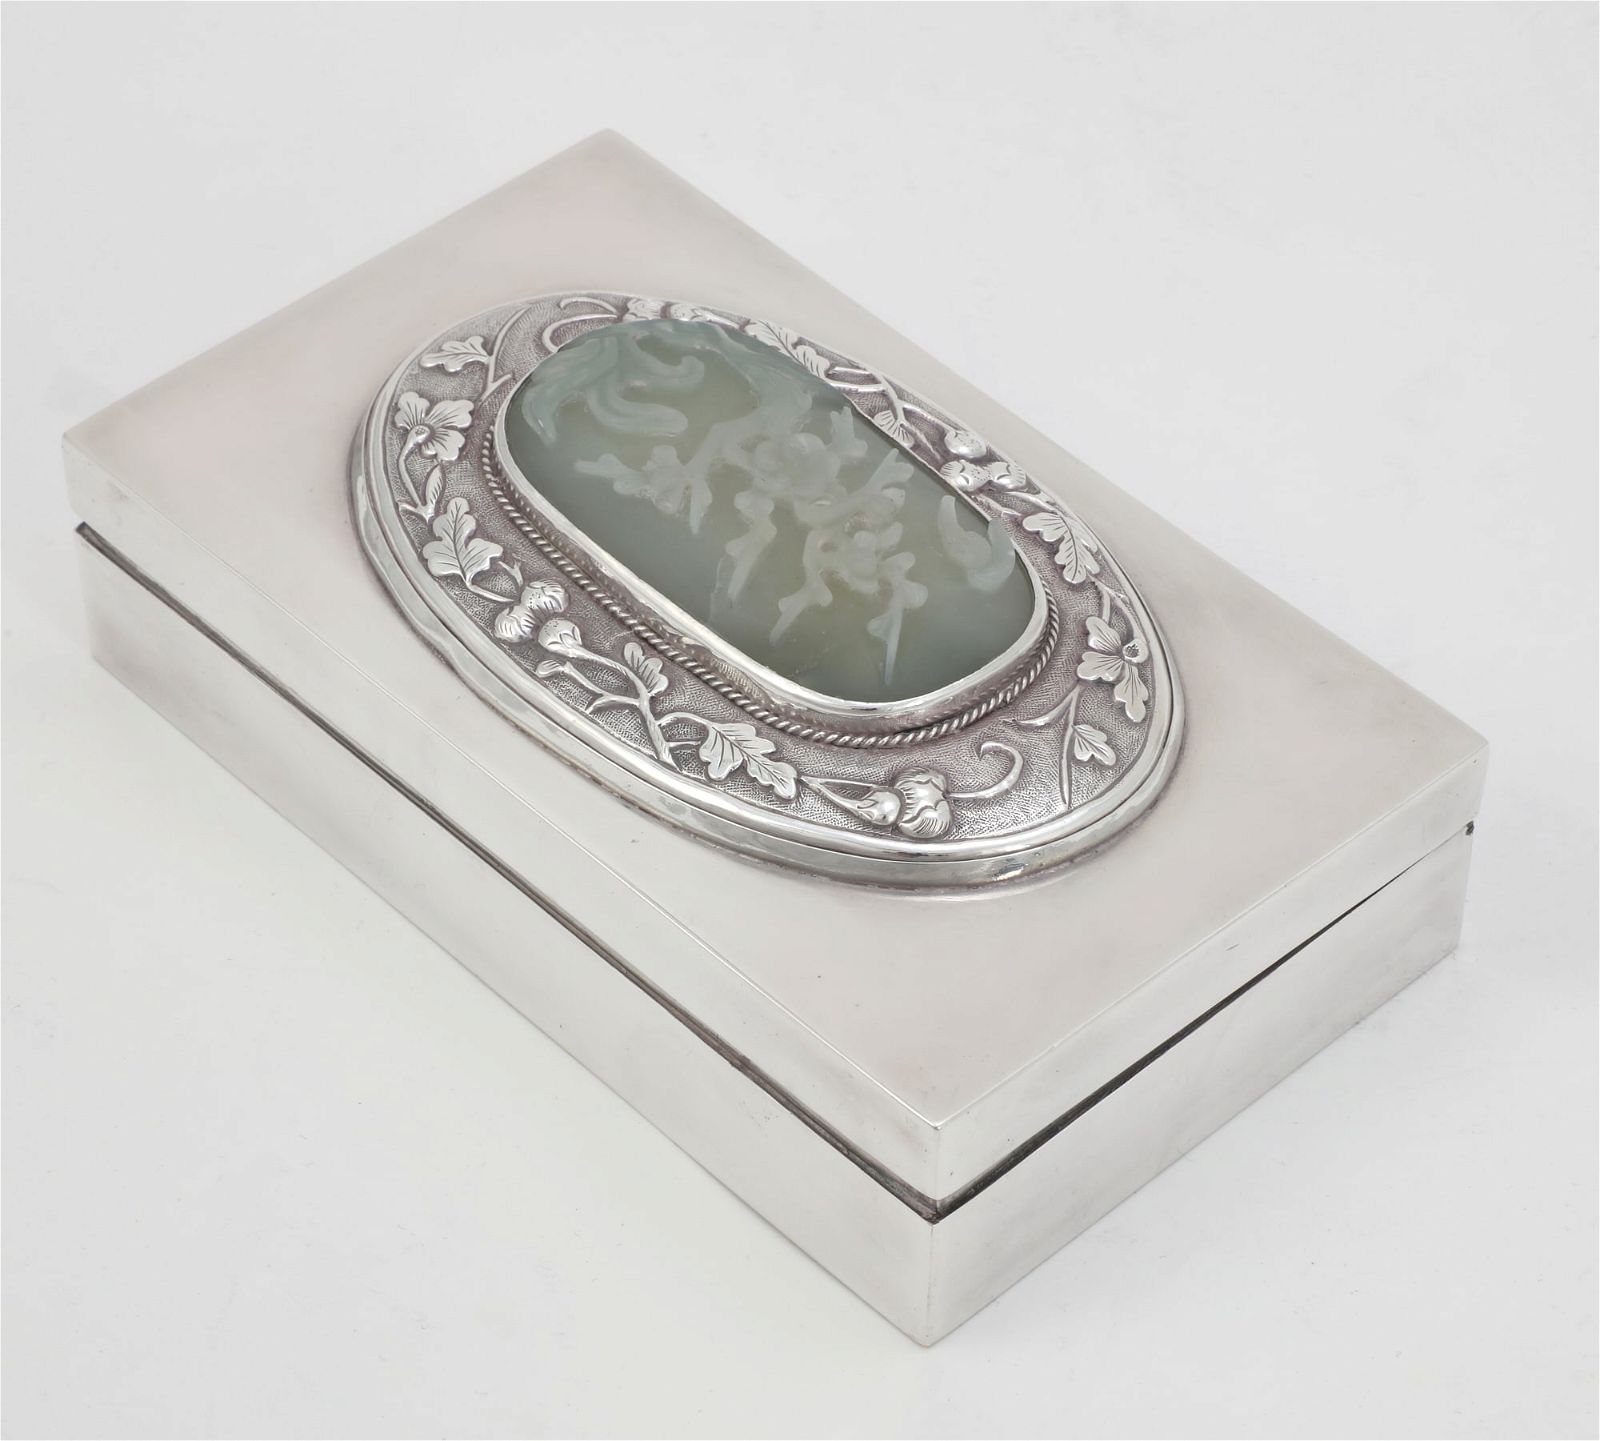 A CHINESE  JADE PLAQUE IN A SILVER